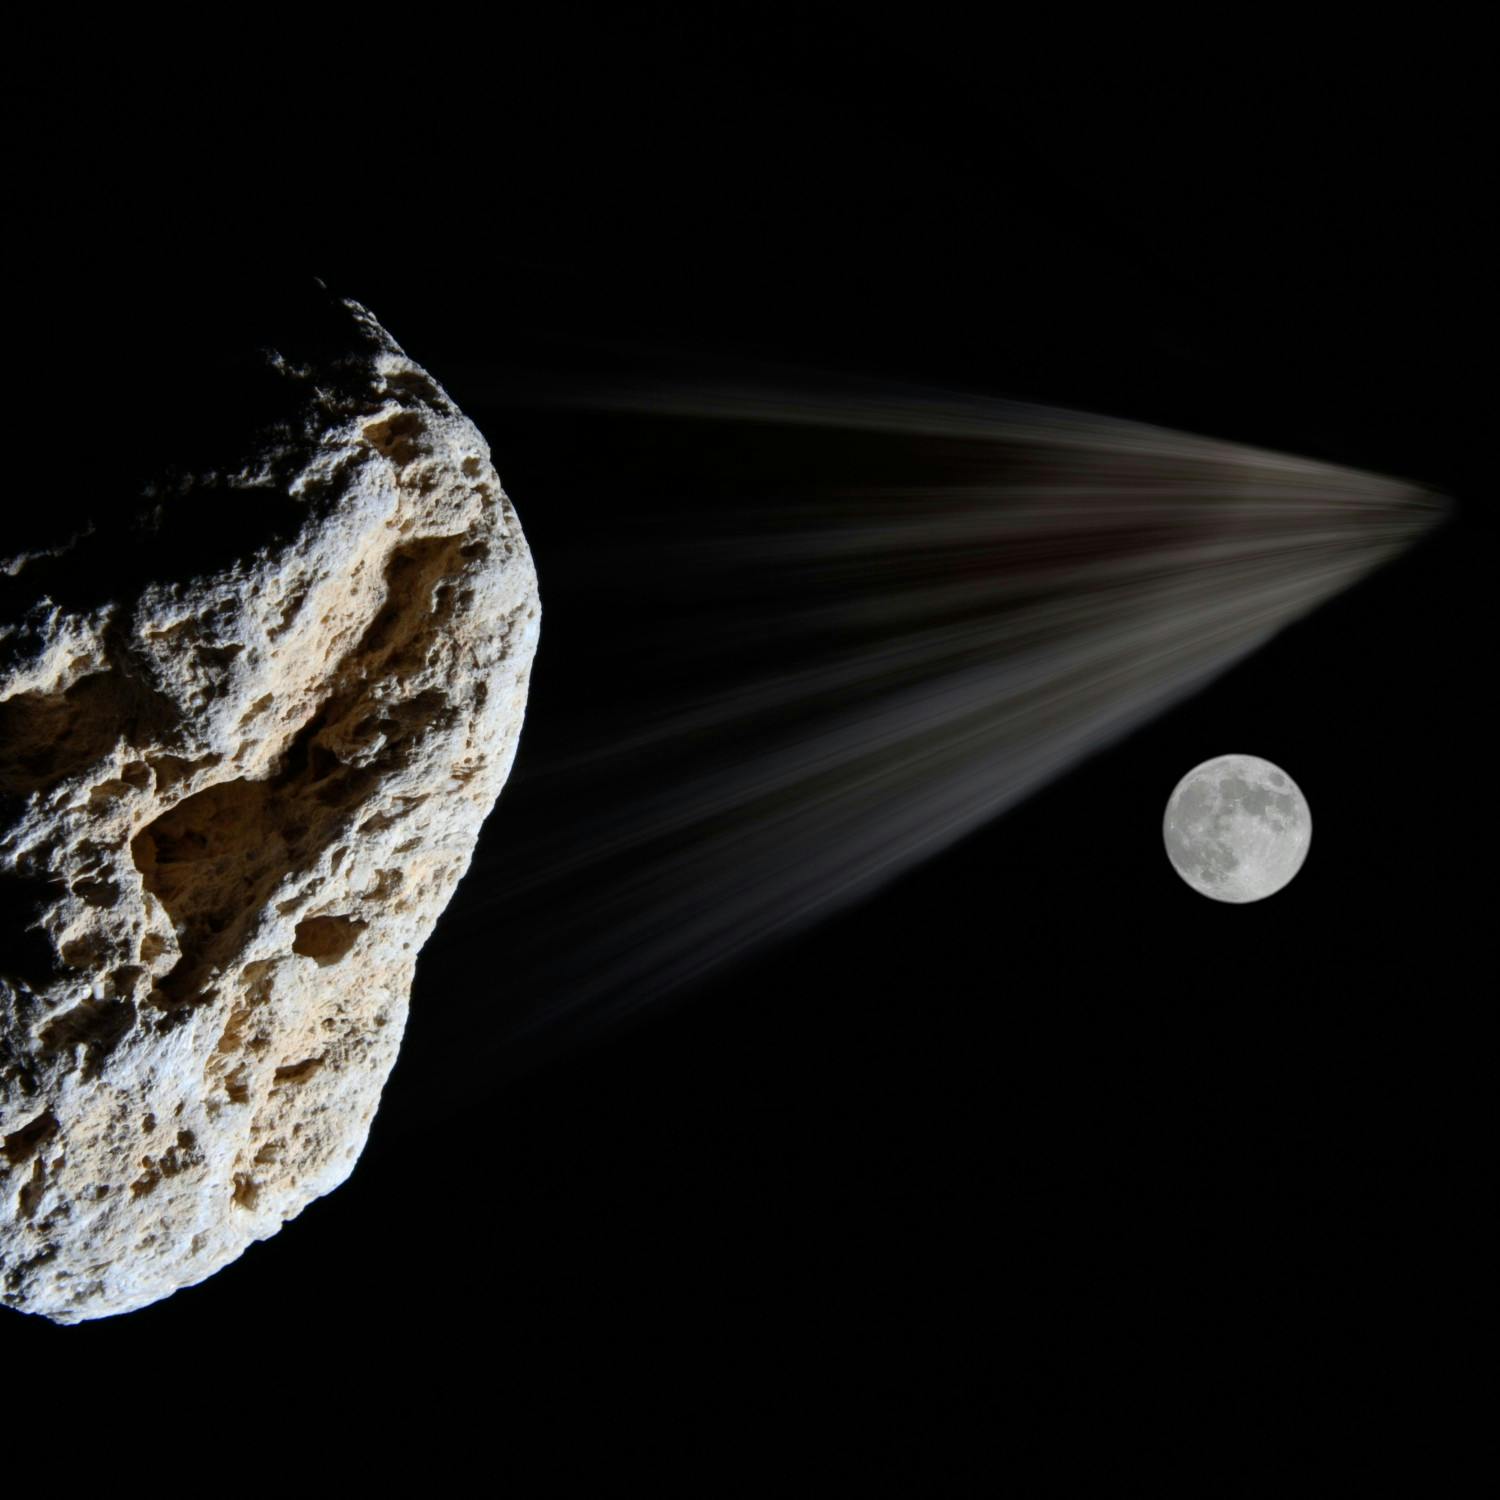 Why NASA crashed a spacecraft into an asteroid